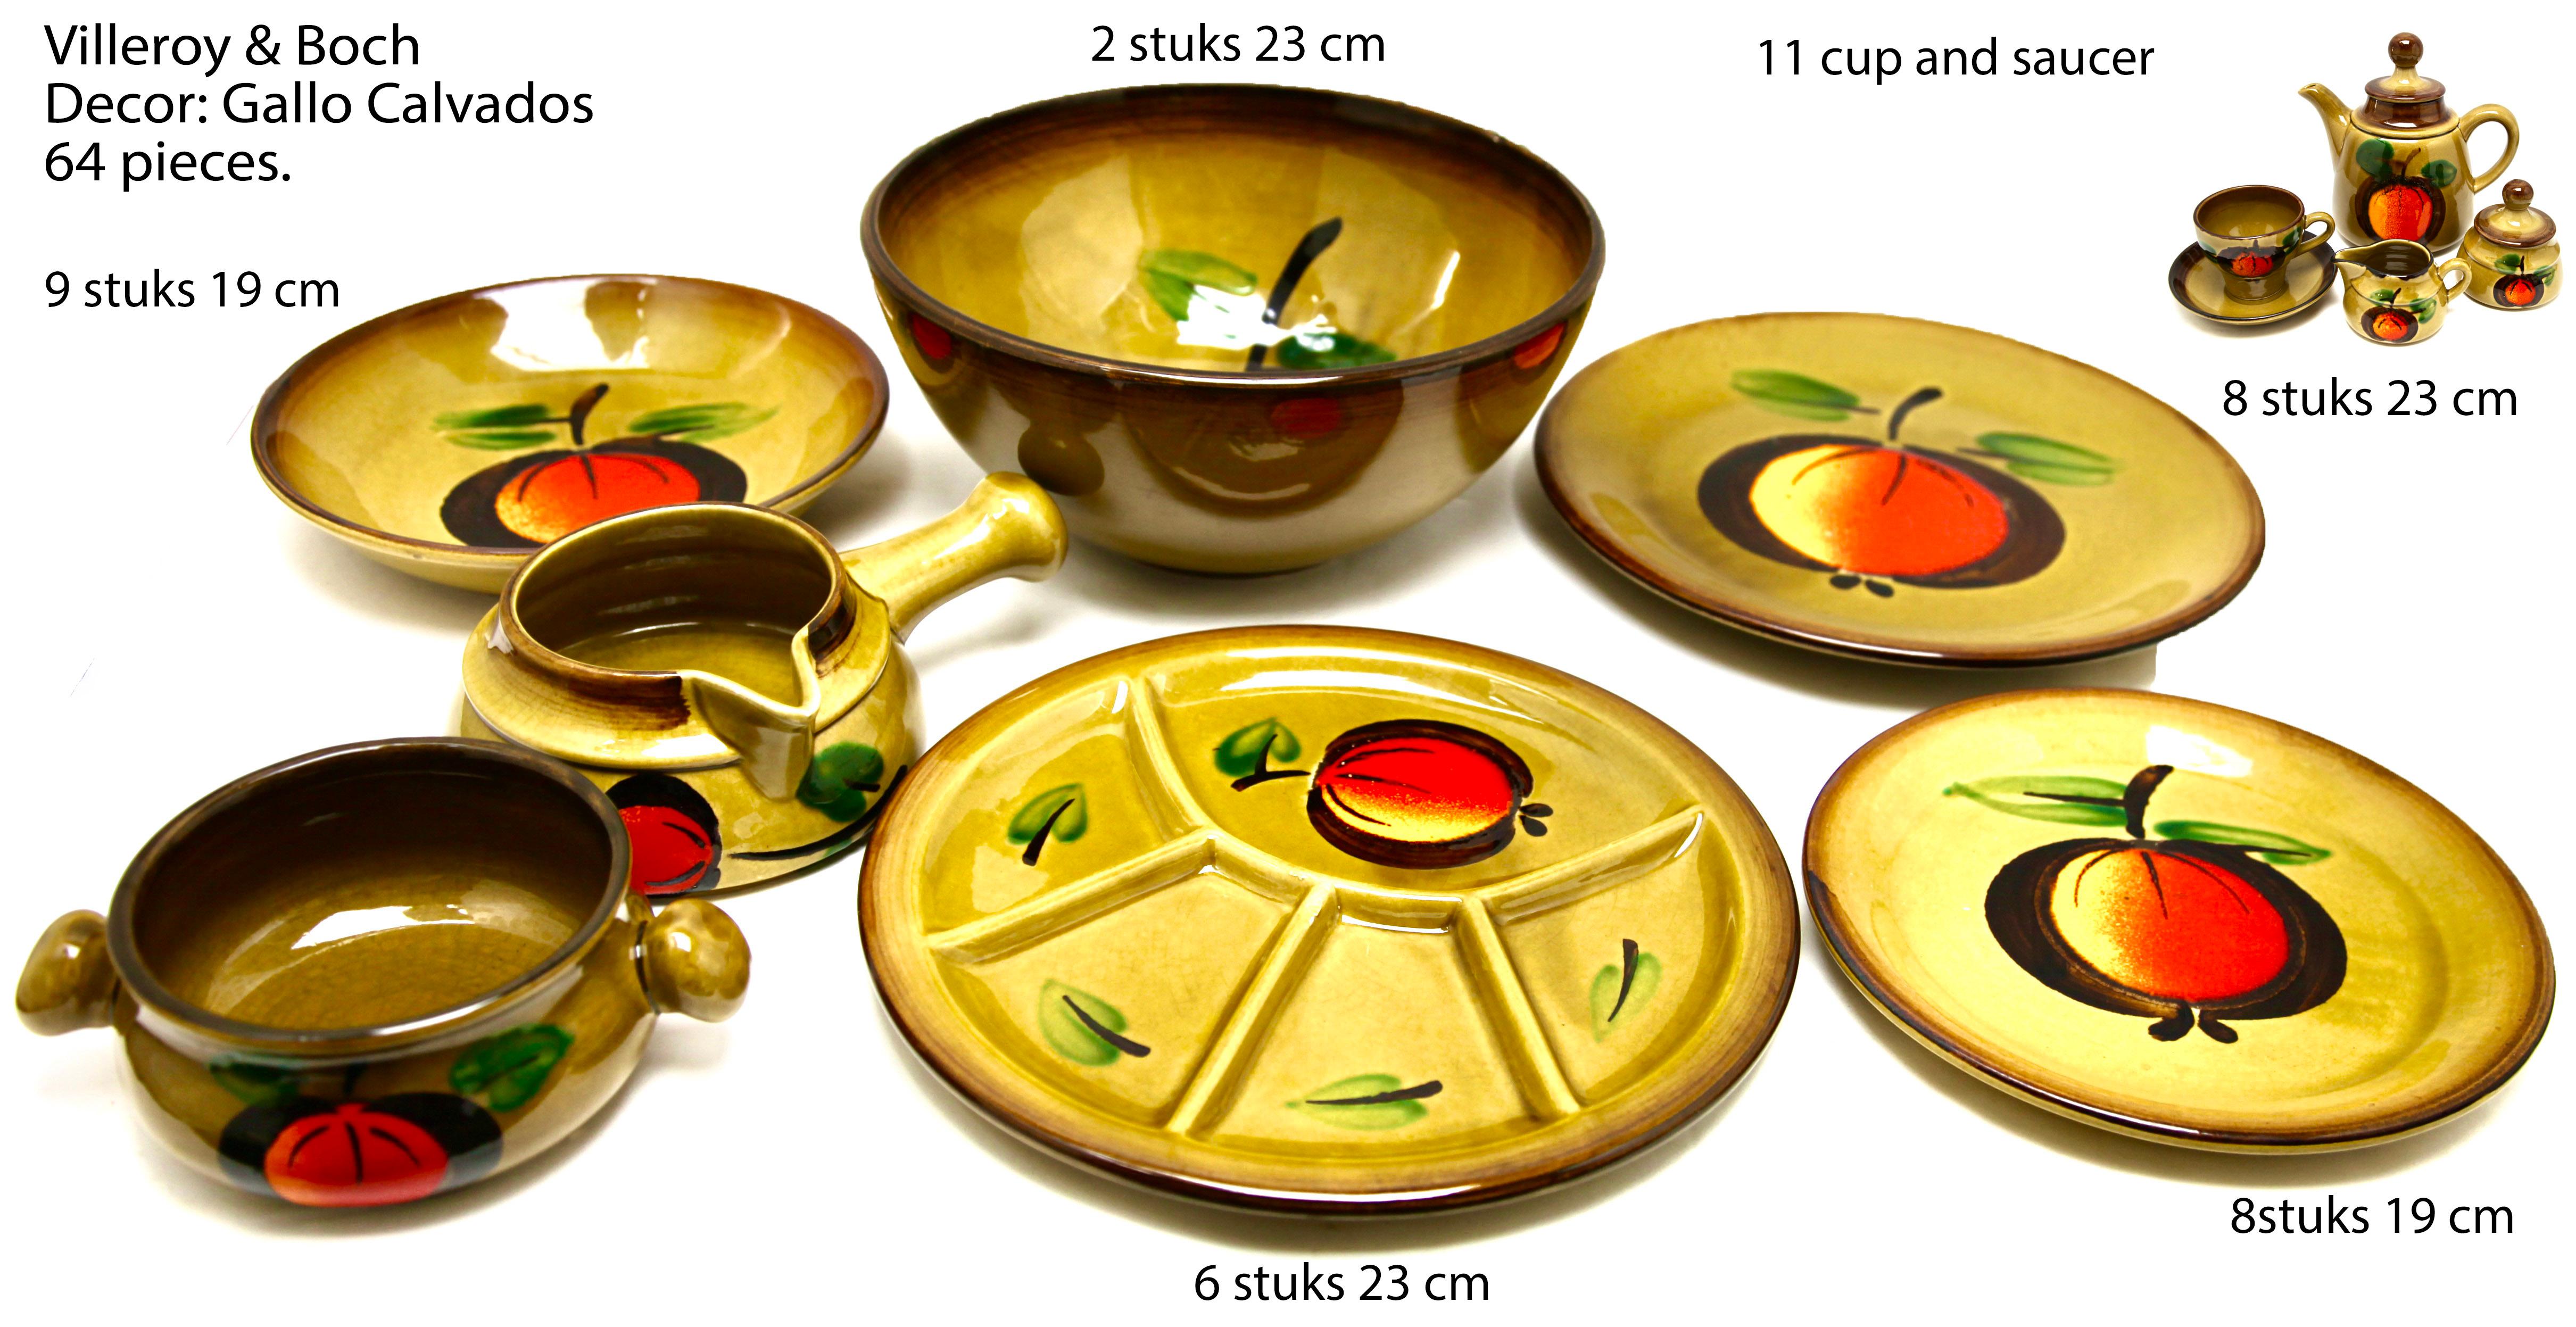 Villeroy & Boch Decor: Gallo Calvados 61 pieces

11 Coffee Cup with Saucer 
1 Coffee Pot with Lid hieght 20 cm
1 Milk Jug
1 Sugar Bowl with Lid
1 Soup tureen with lid
9 Dessert/Salad /soup Plates 19 cm
8 Plates 23 cm
8 plates 19 cm
2 Big